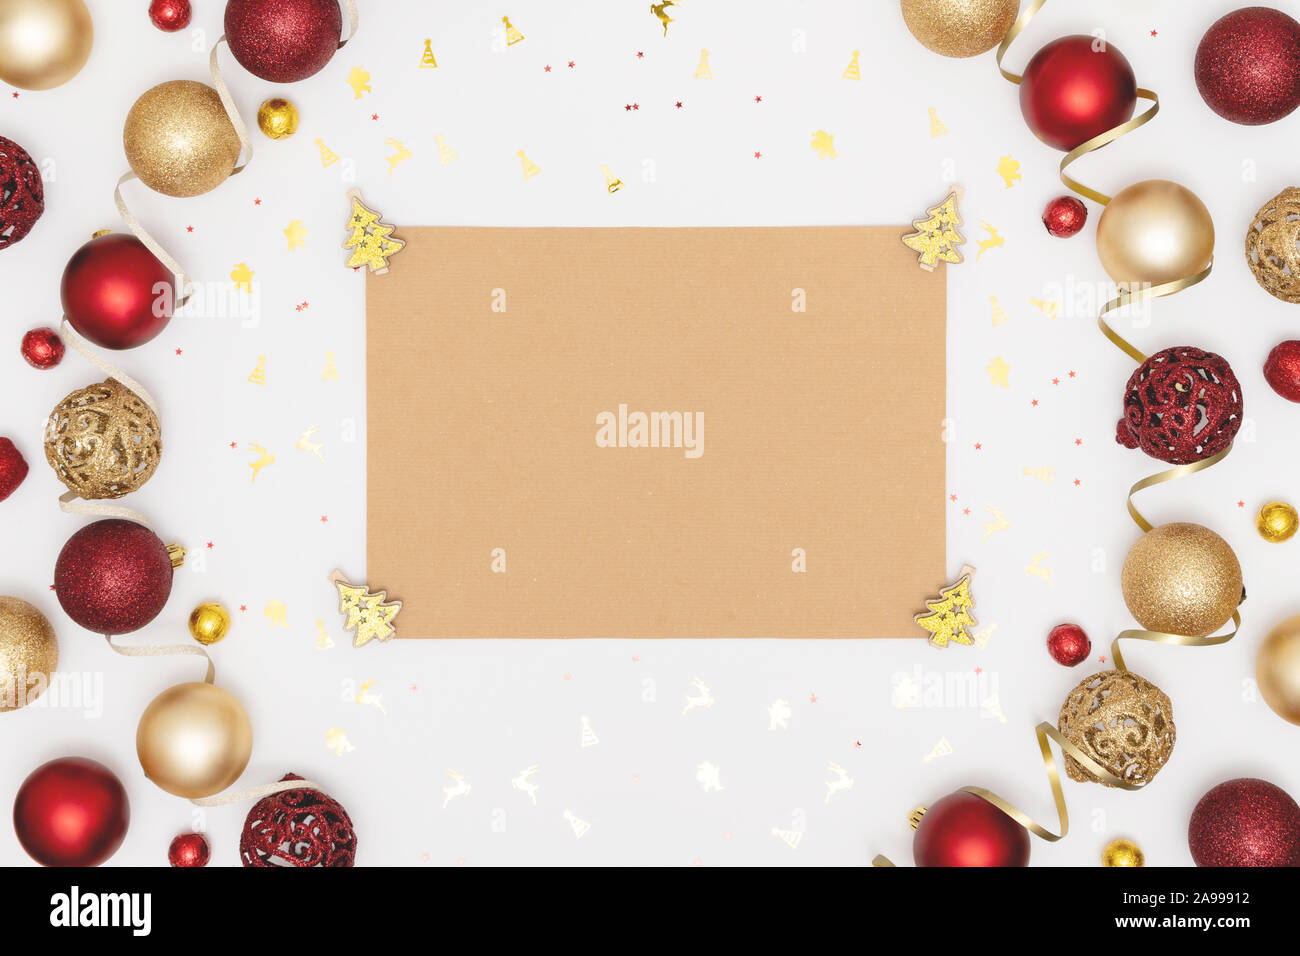 New Year And Christmas Decorations And Blank Craft Sheet Of Paper Wish List Or Goals Concept Top View Flat Lay Copy Space Stock Photo Alamy